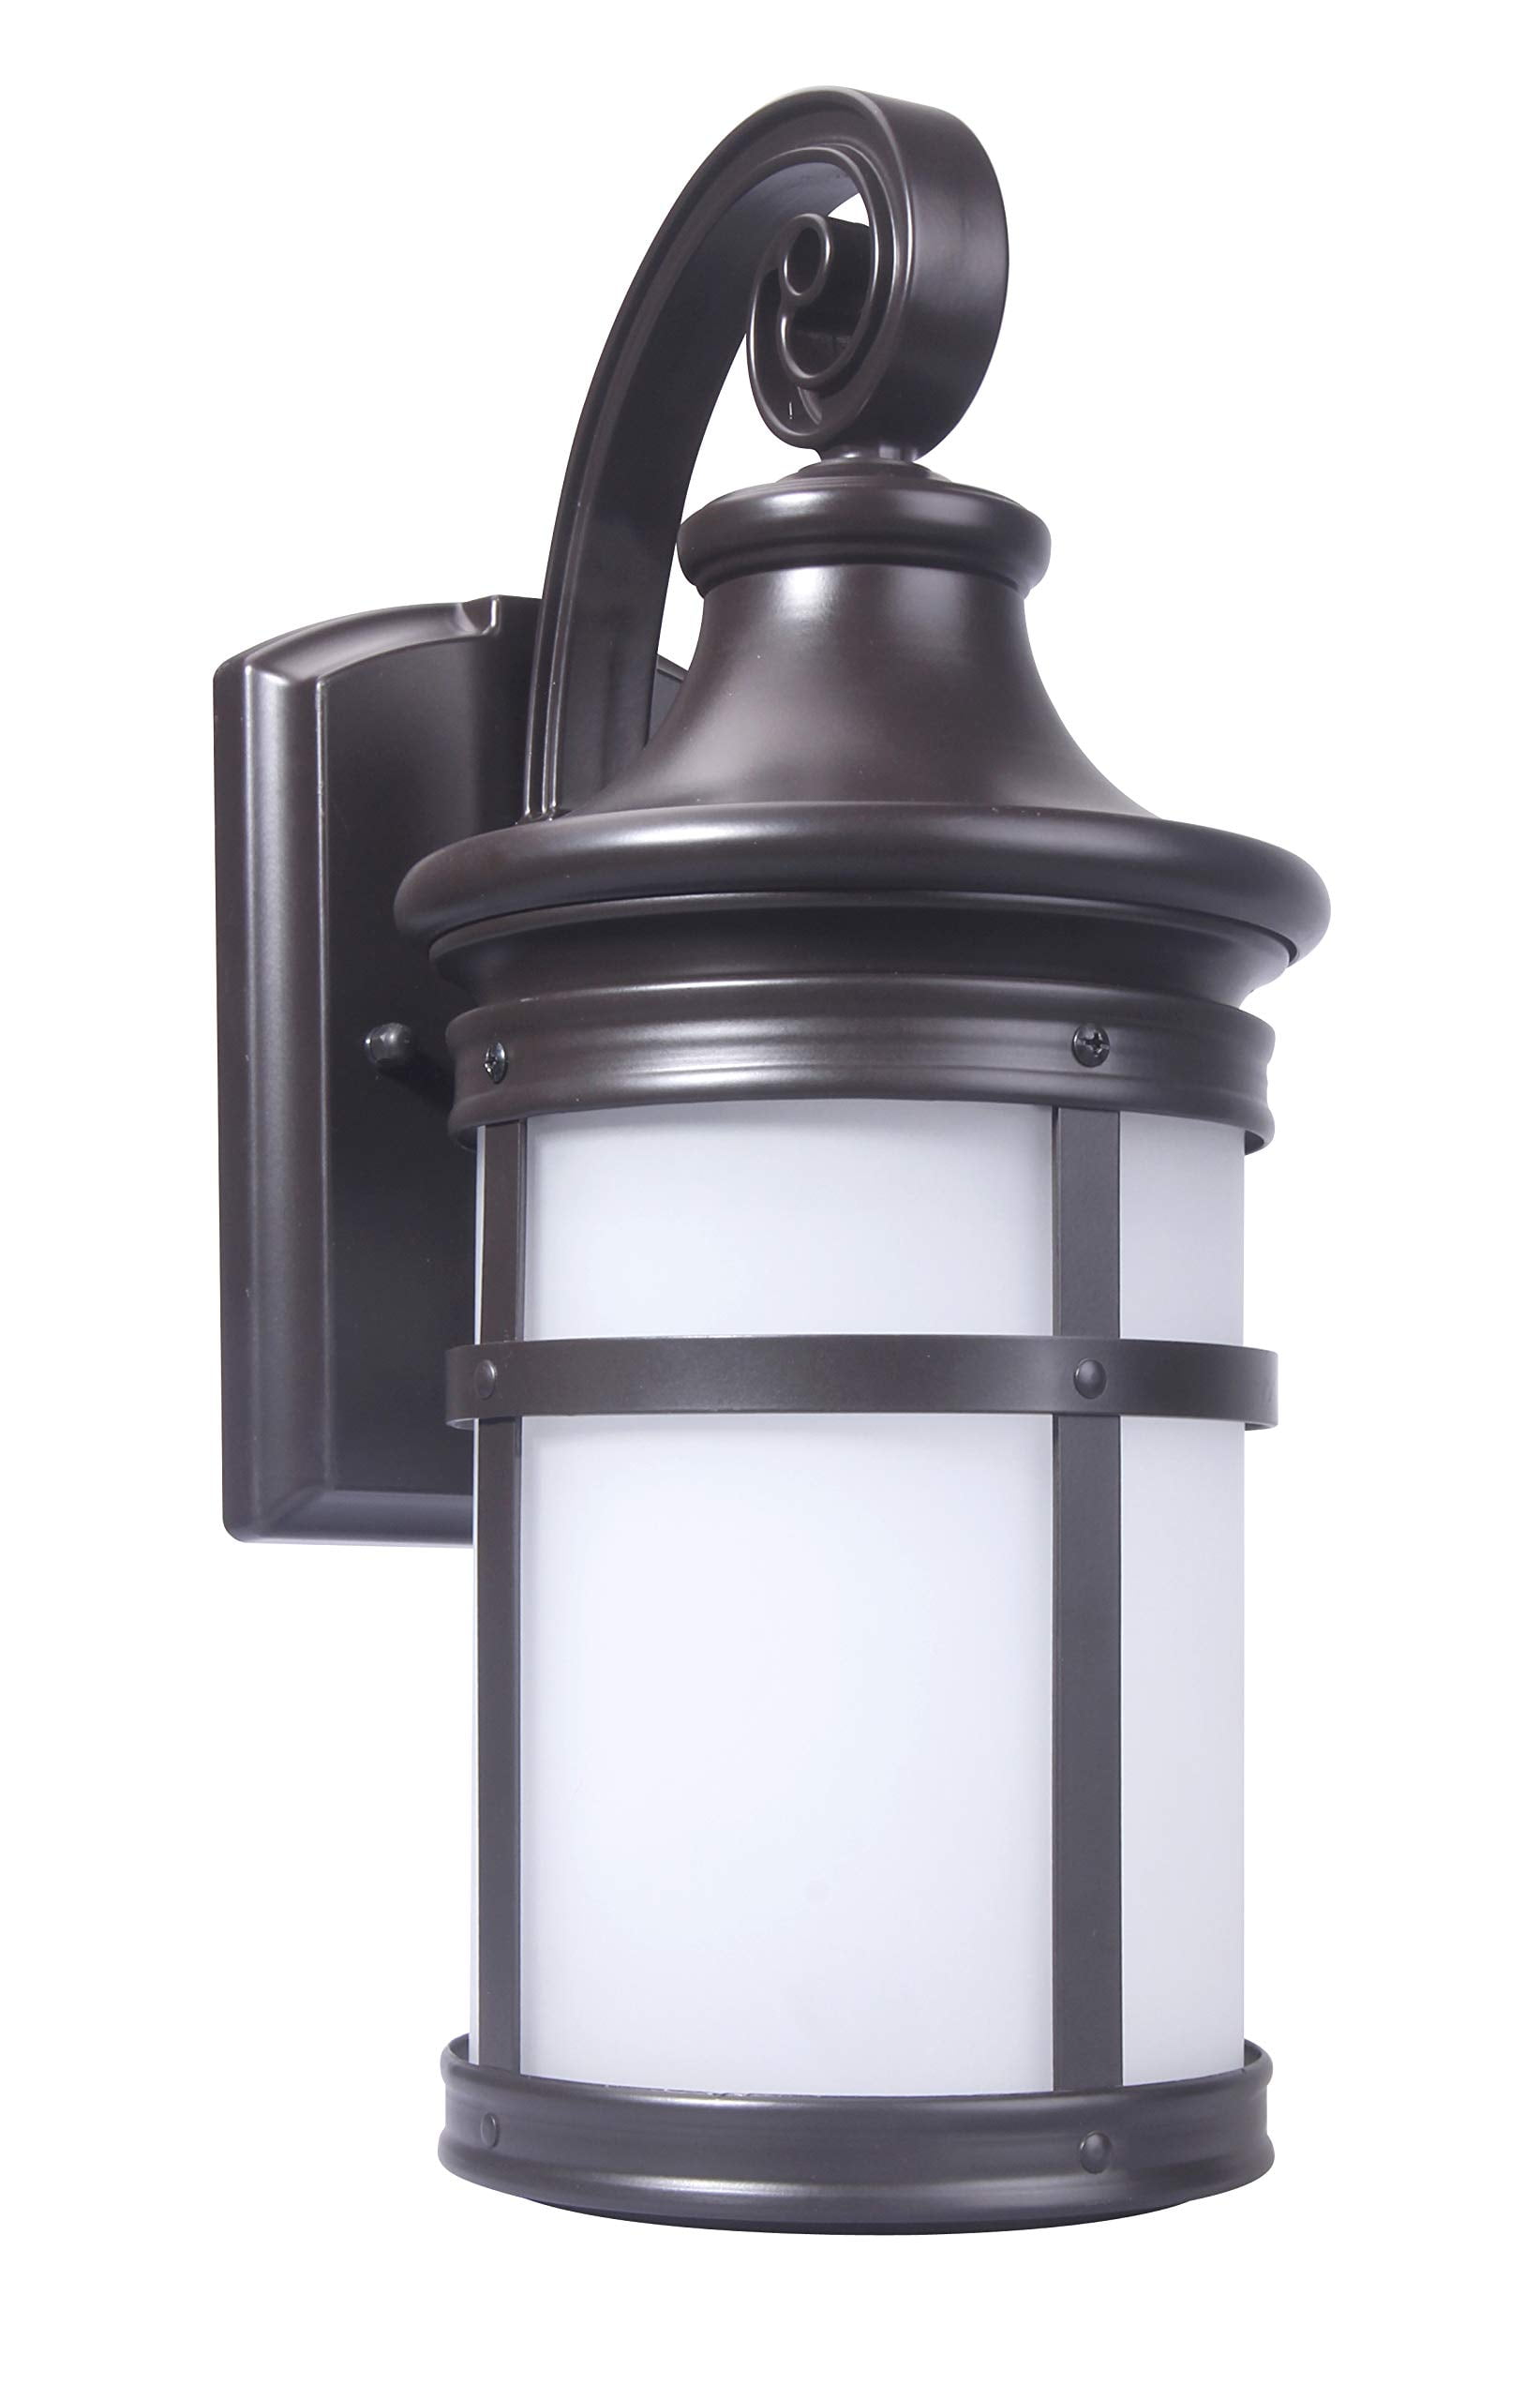 CORAMDEO Large Outdoor LED Round Mission Style Wall Sconce Lantern, Wet  Location, Built in LED, 120W of Light from 12.5W of Power, 1200 Lumens, 3K,  Bronze Finish w/Frosted Glass Lens (W023-830LED-BRZ)